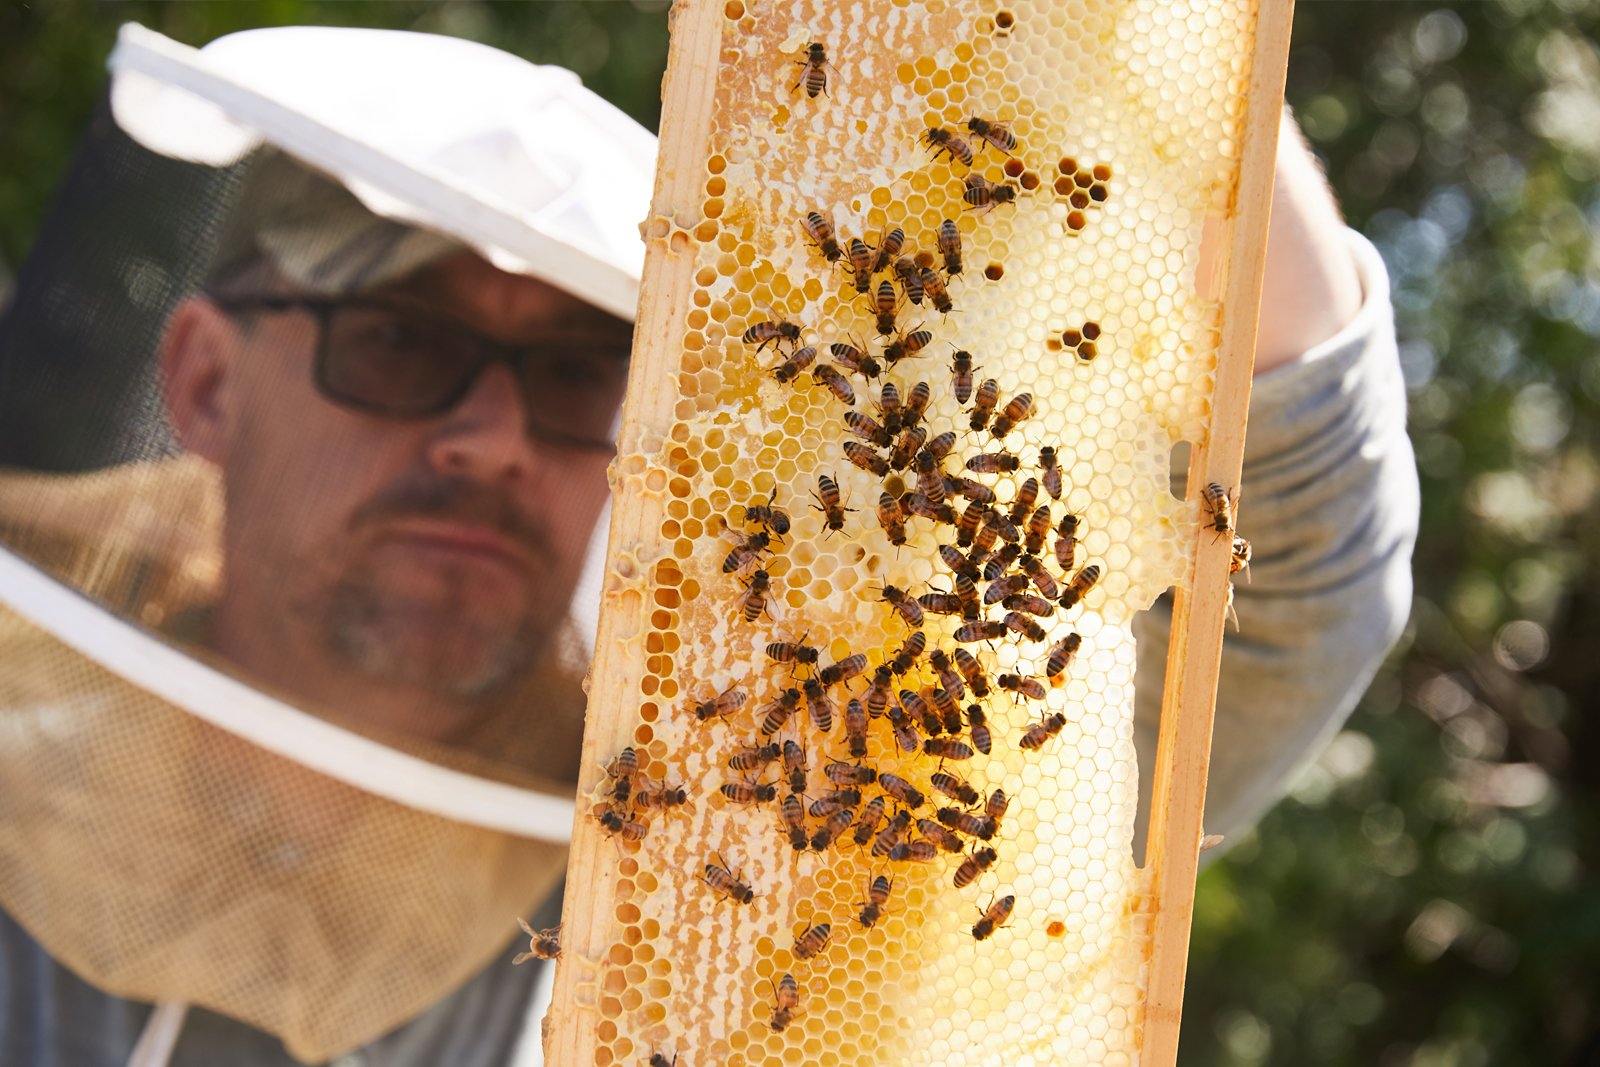 Bee keeper with bees